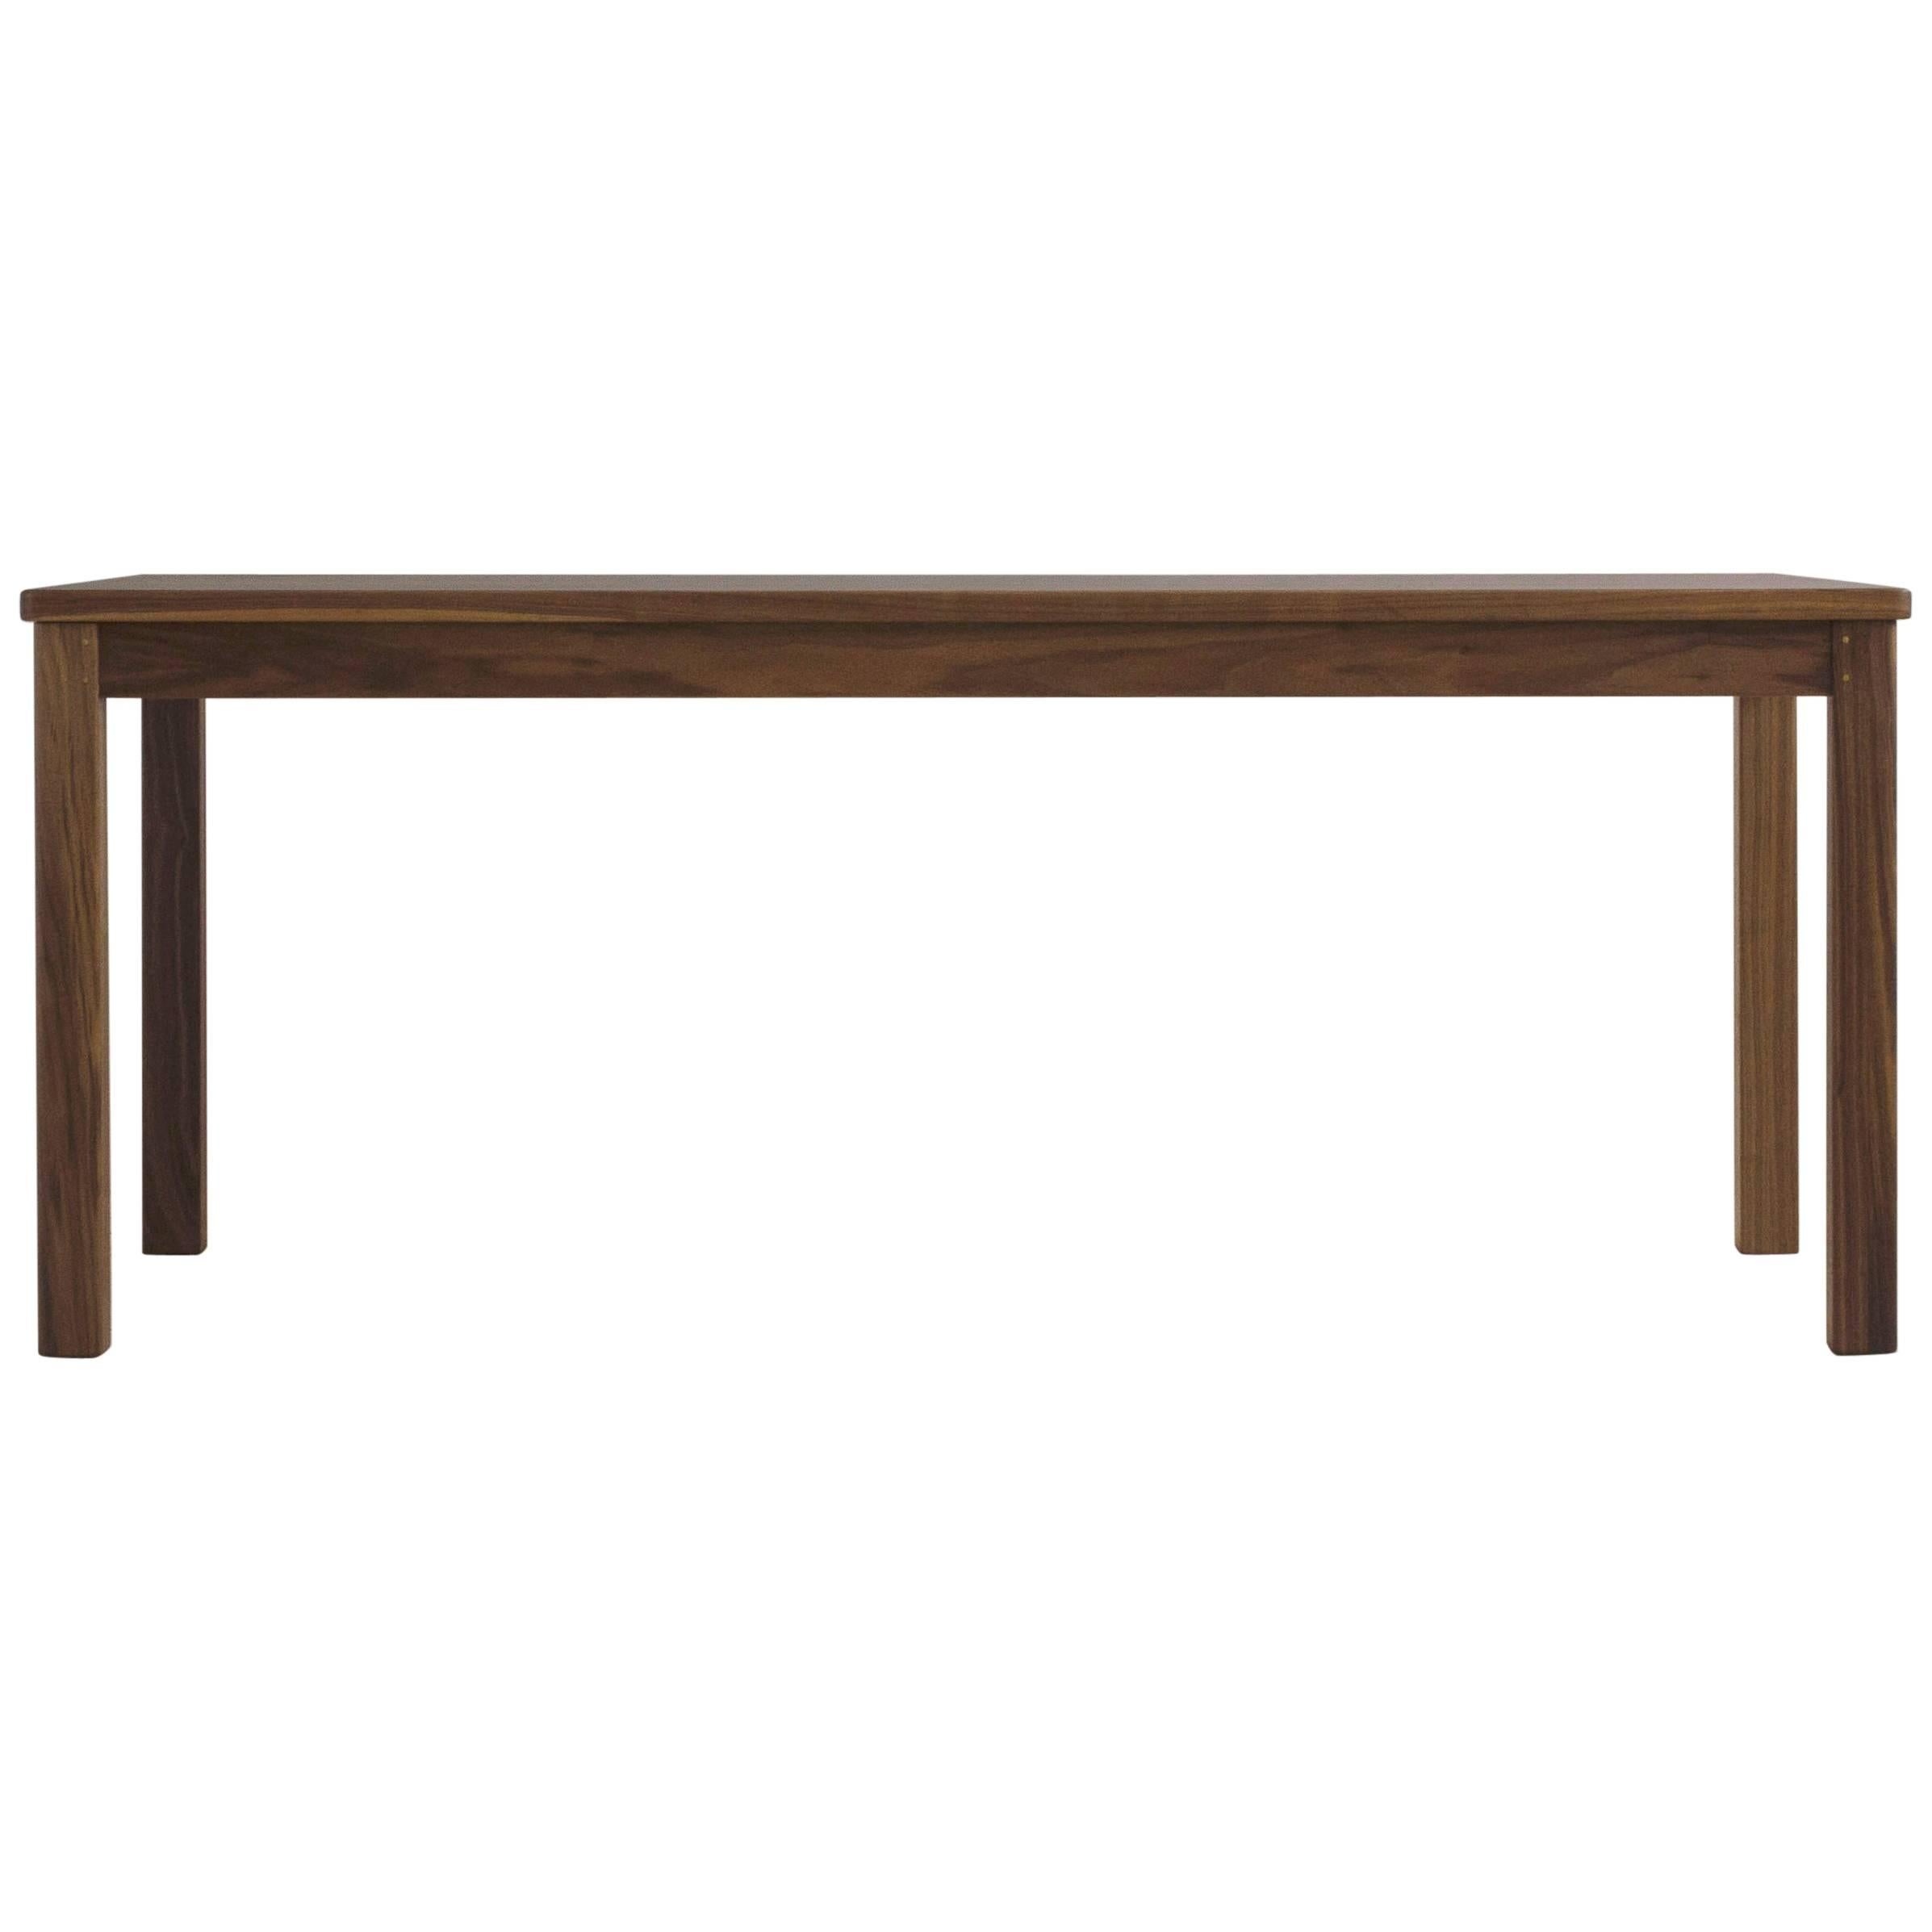 Medium "Lore" Dining Table, Solid-Wood, Black Walnut, Modern Shaker-Style For Sale